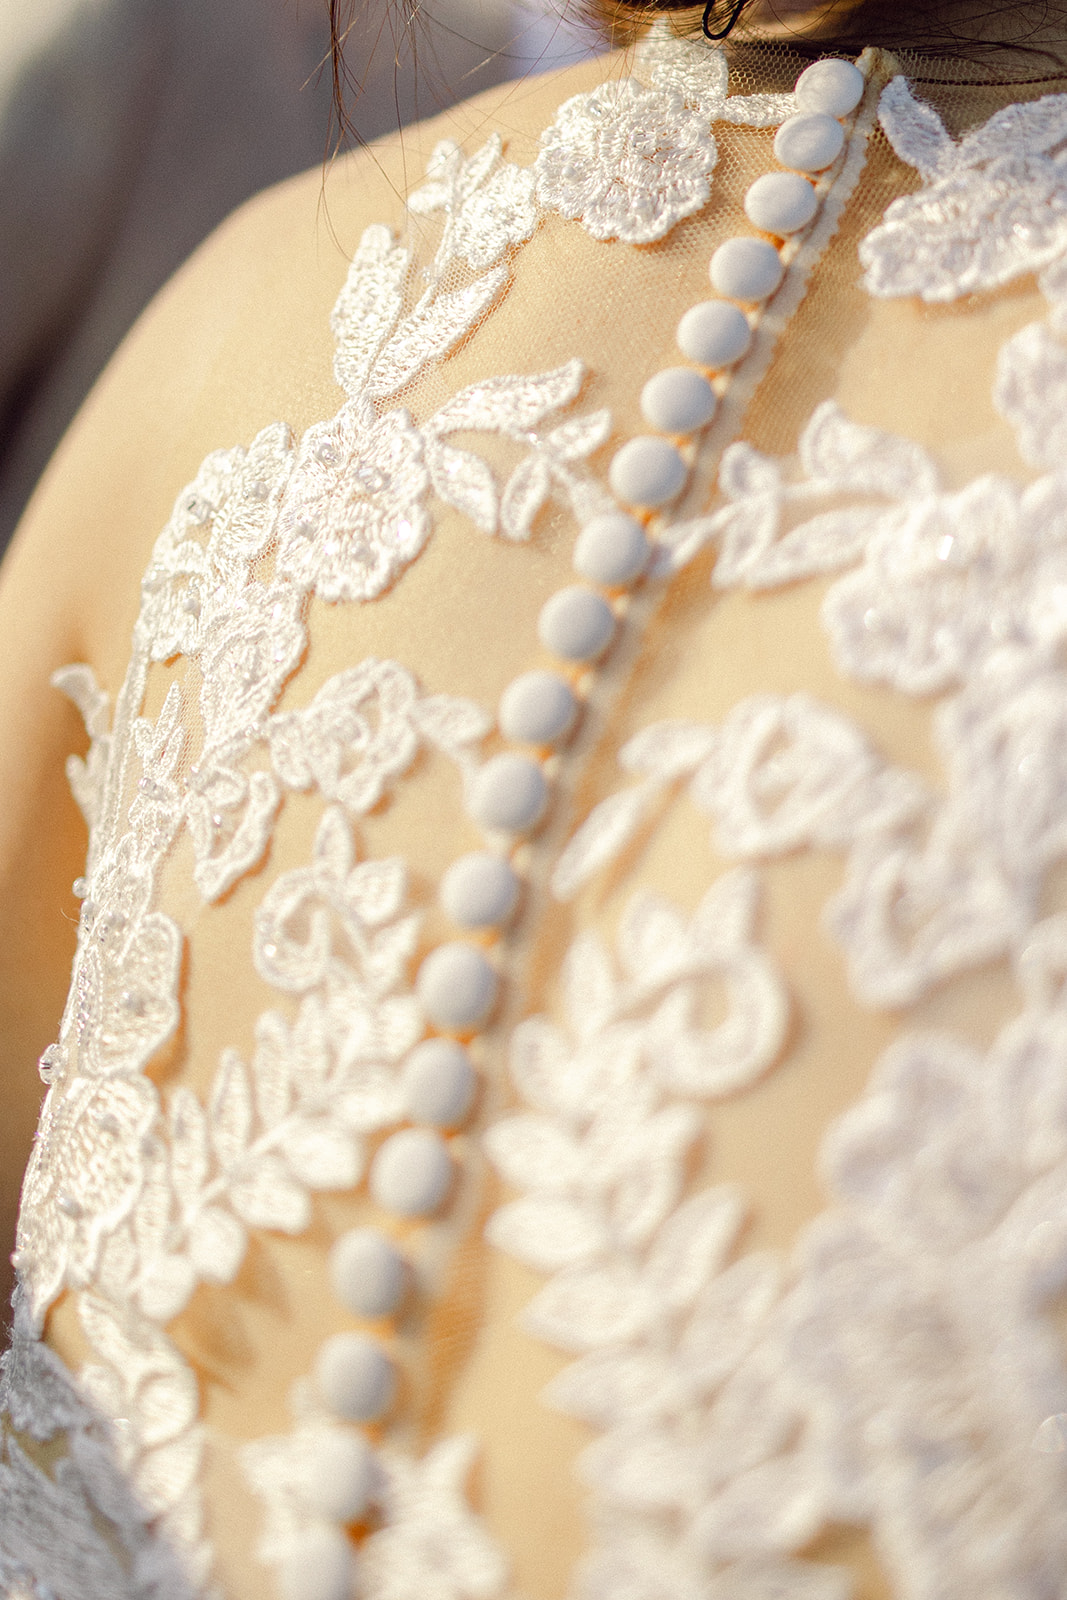 lace wedding dress in detail